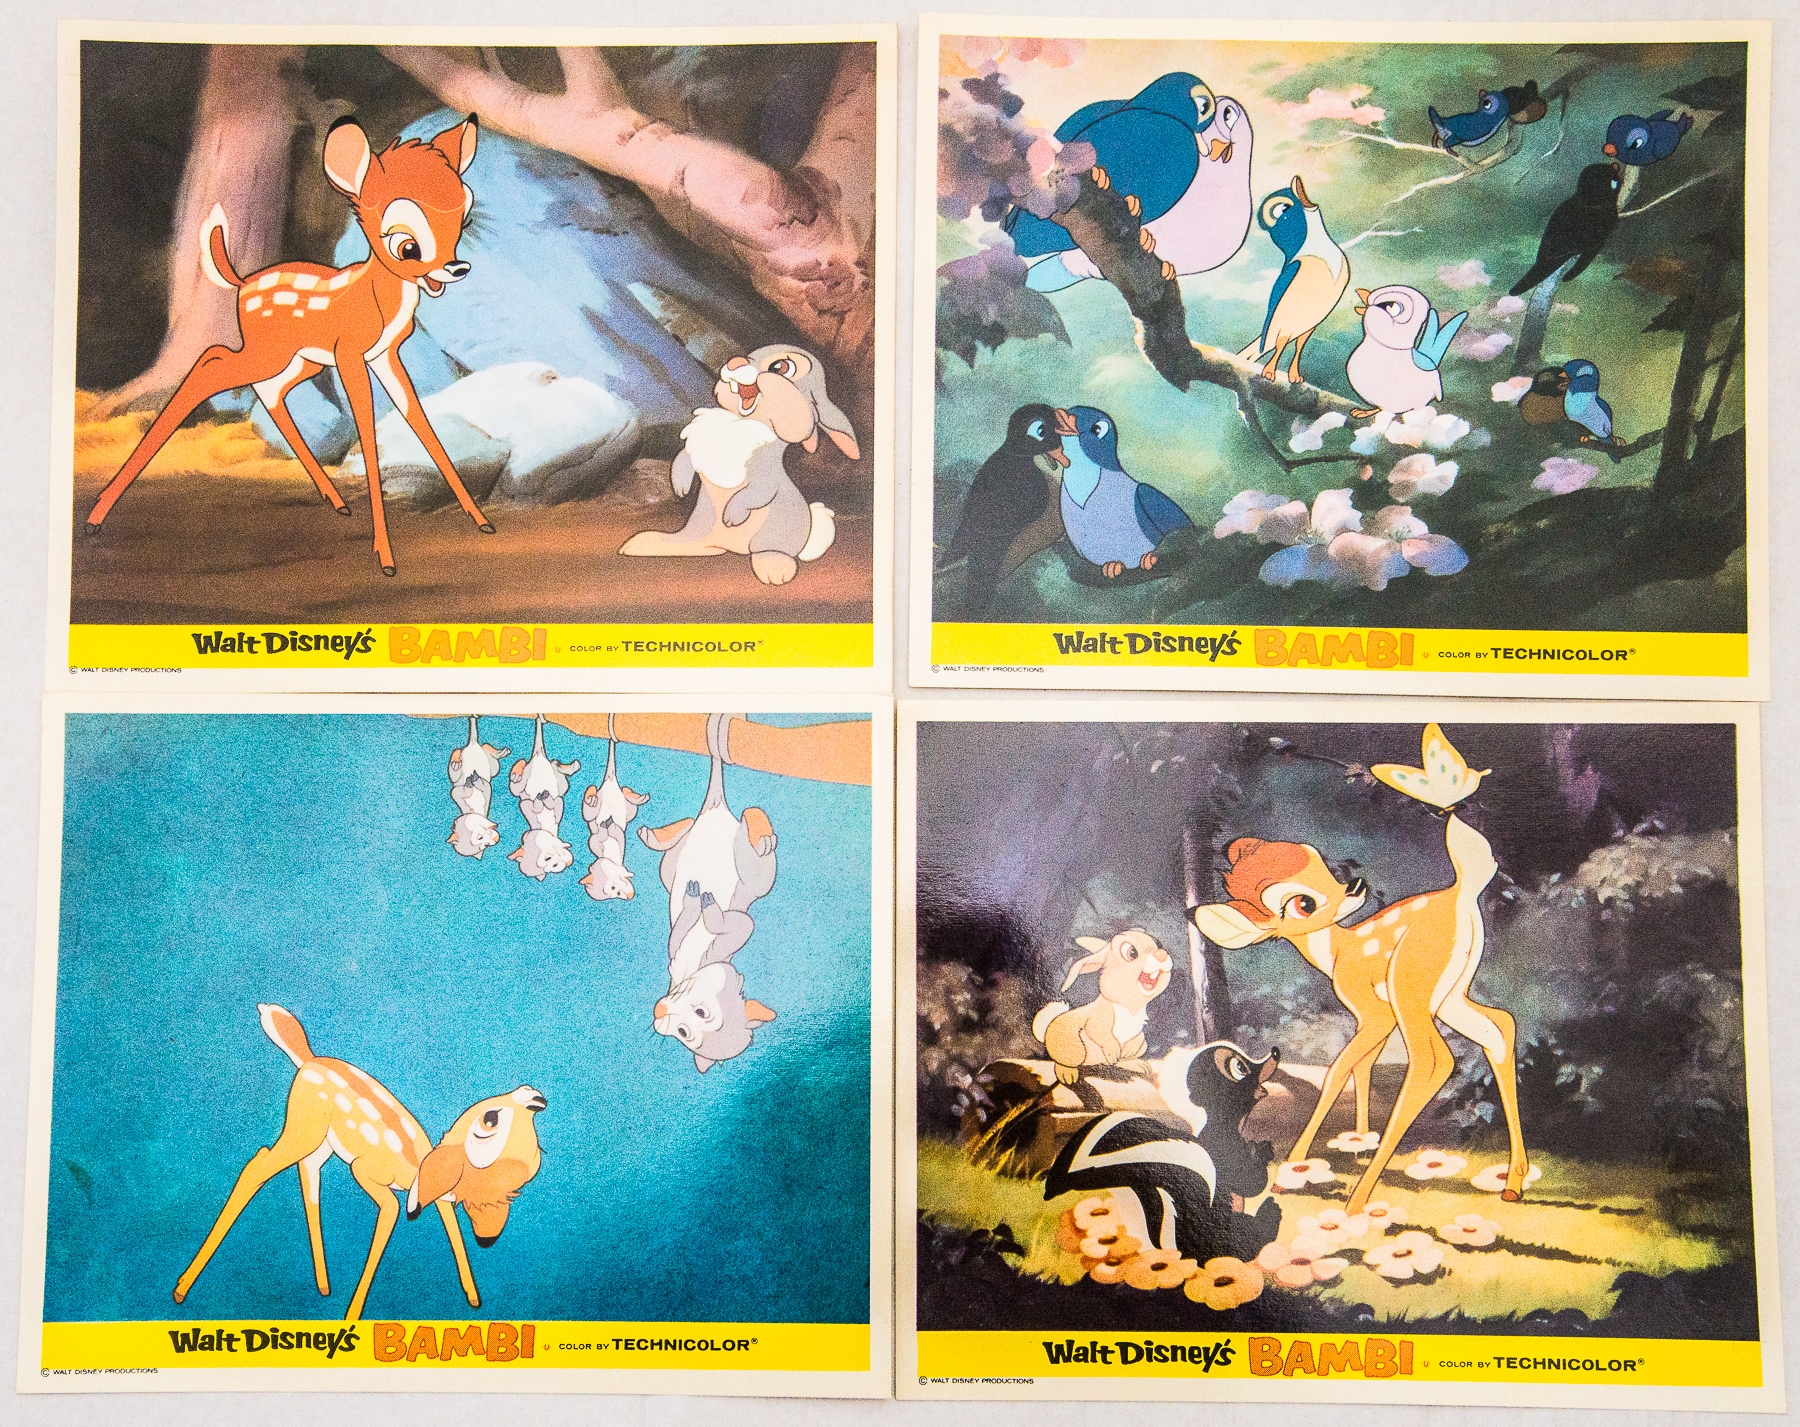 WALT DISNEY: BAMBI (1942) - 1960's RE-RELEASE FRONT OF HOUSE SET - Very Good/Near Fine - Image 2 of 2